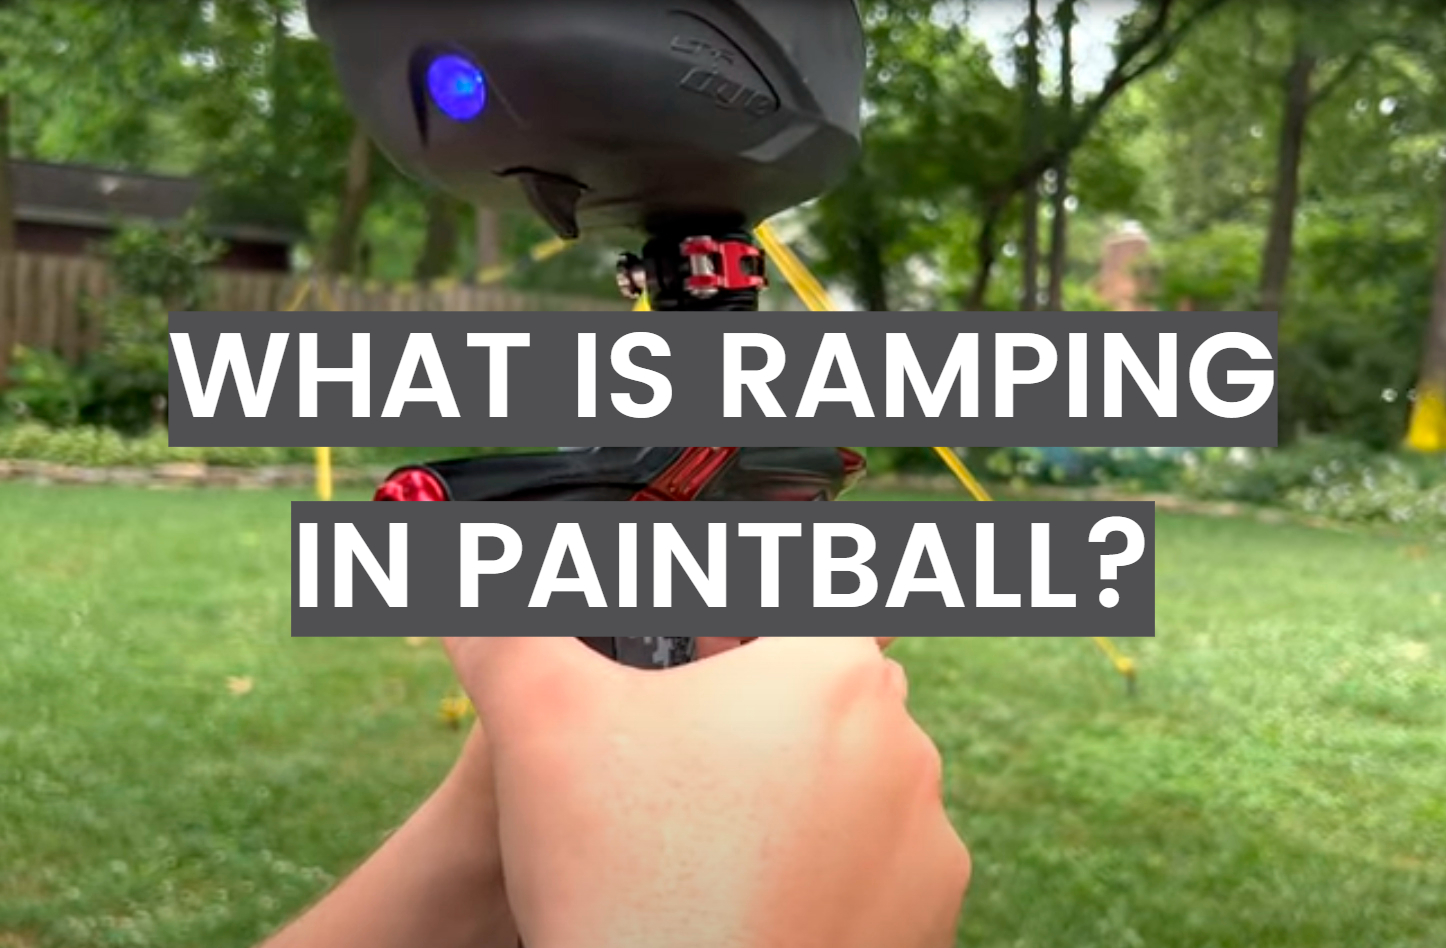 What Is Ramping in Paintball?